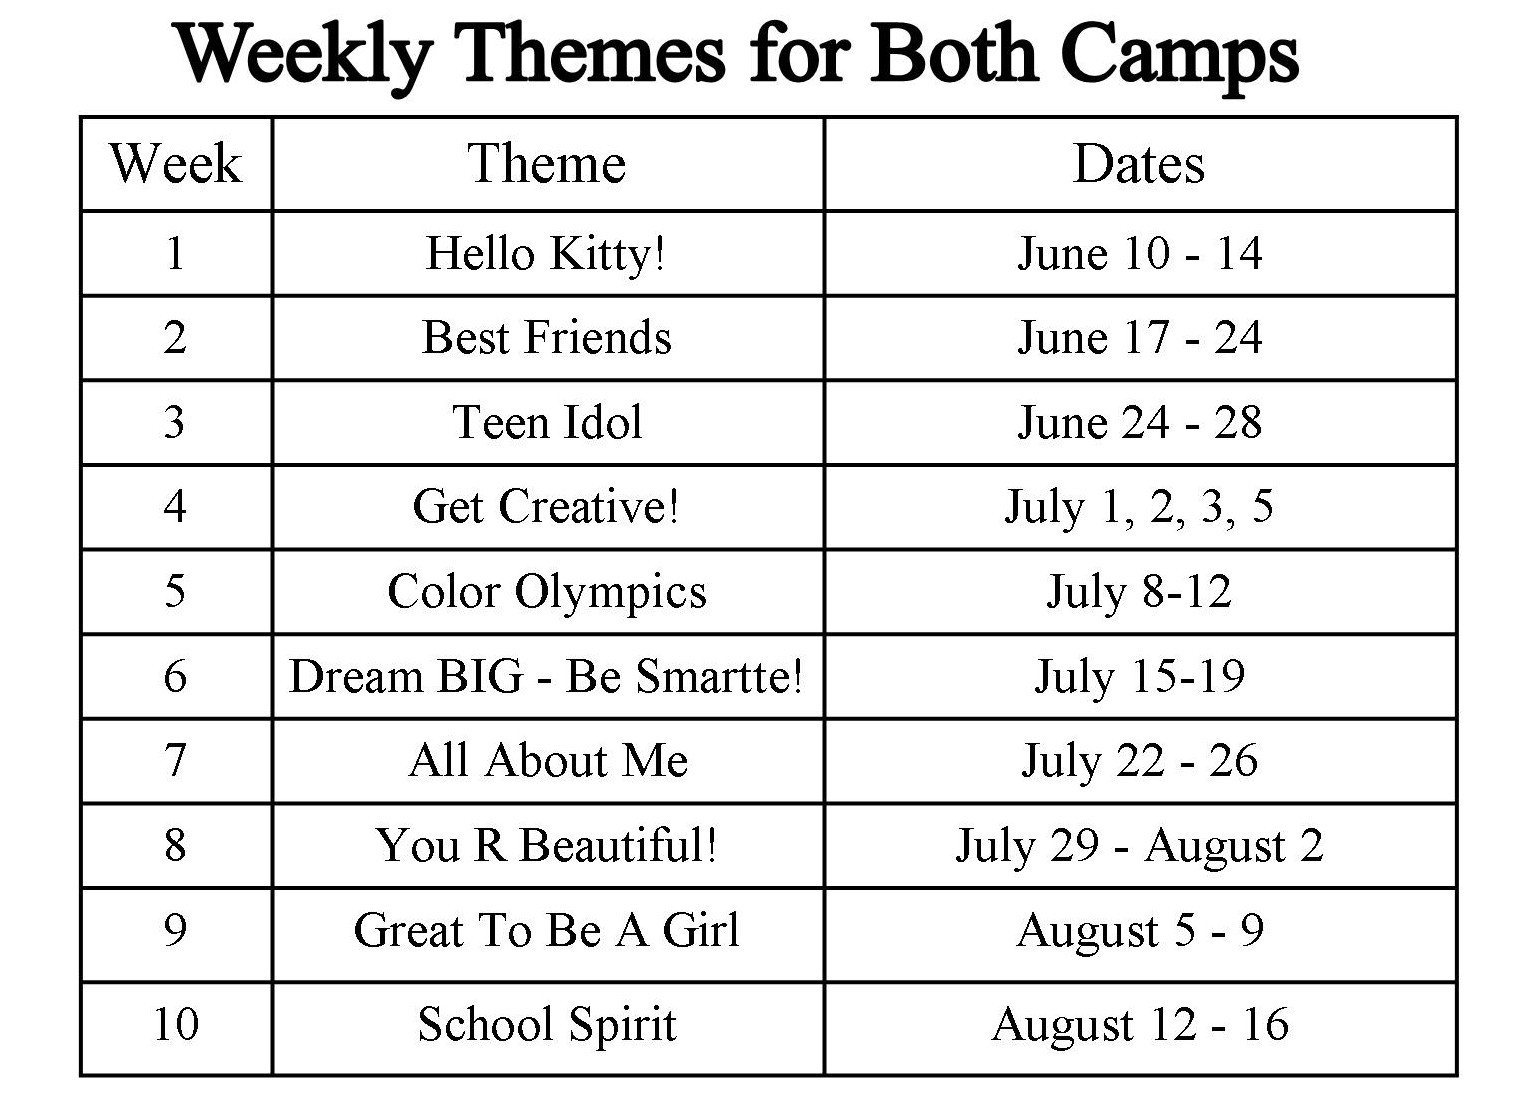 Summer Camp Weekly Theme Ideas
 Summer Camp Themes